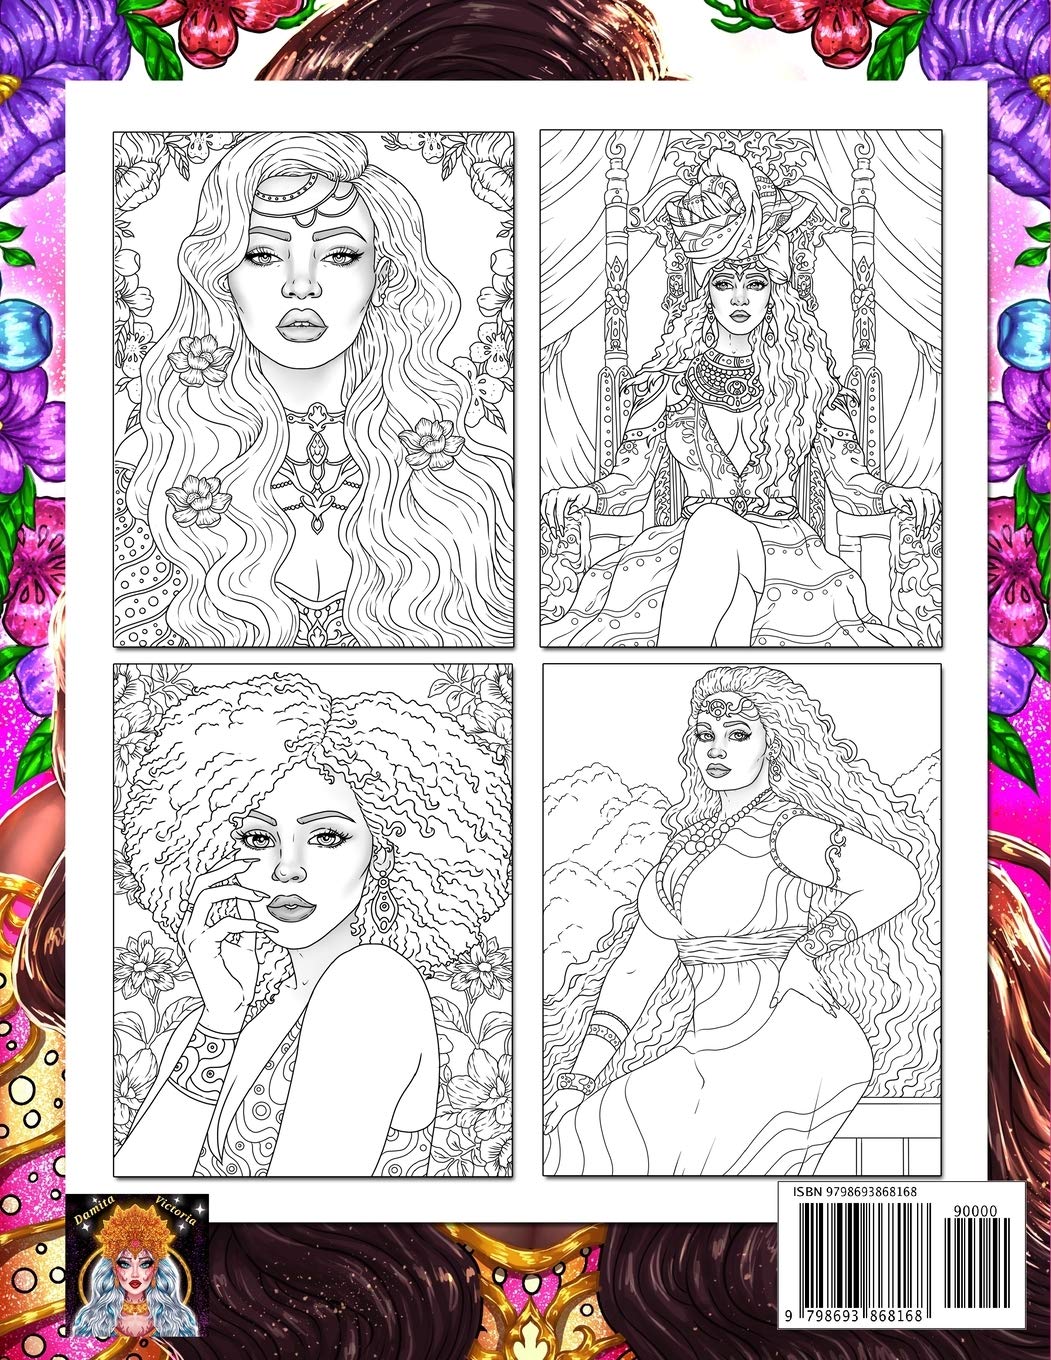 Adult Coloring Book | Fantastic Beauties Book Three: Women Coloring Book for Adults Featuring a Beautiful Portrait Coloring Pages for Adults Relaxation